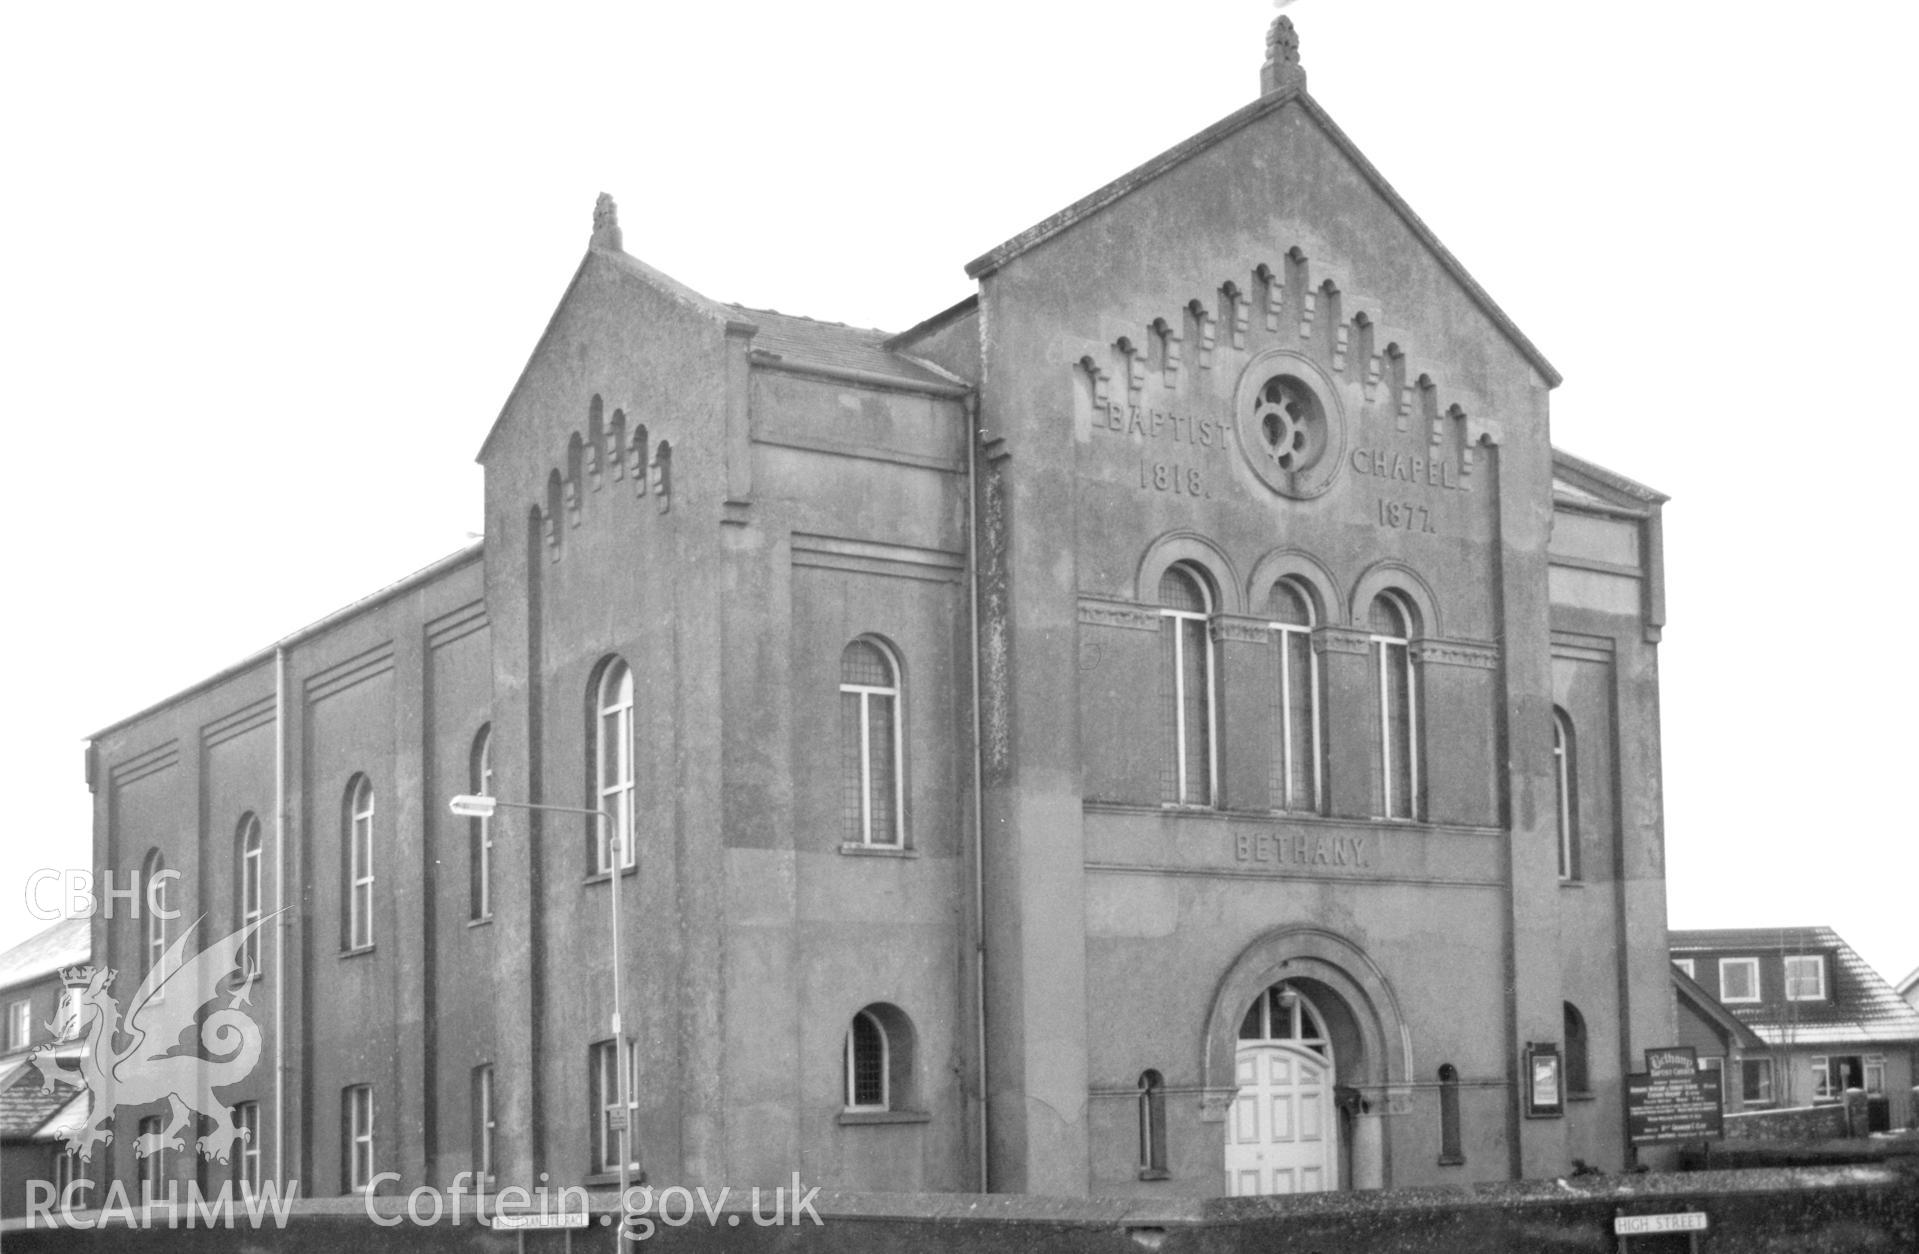 Digital copy of a black and white photograph showing an exterior view of Bethany English Baptist Chapel,  Pembroke Dock, taken by Robert Scourfield, c.1996.